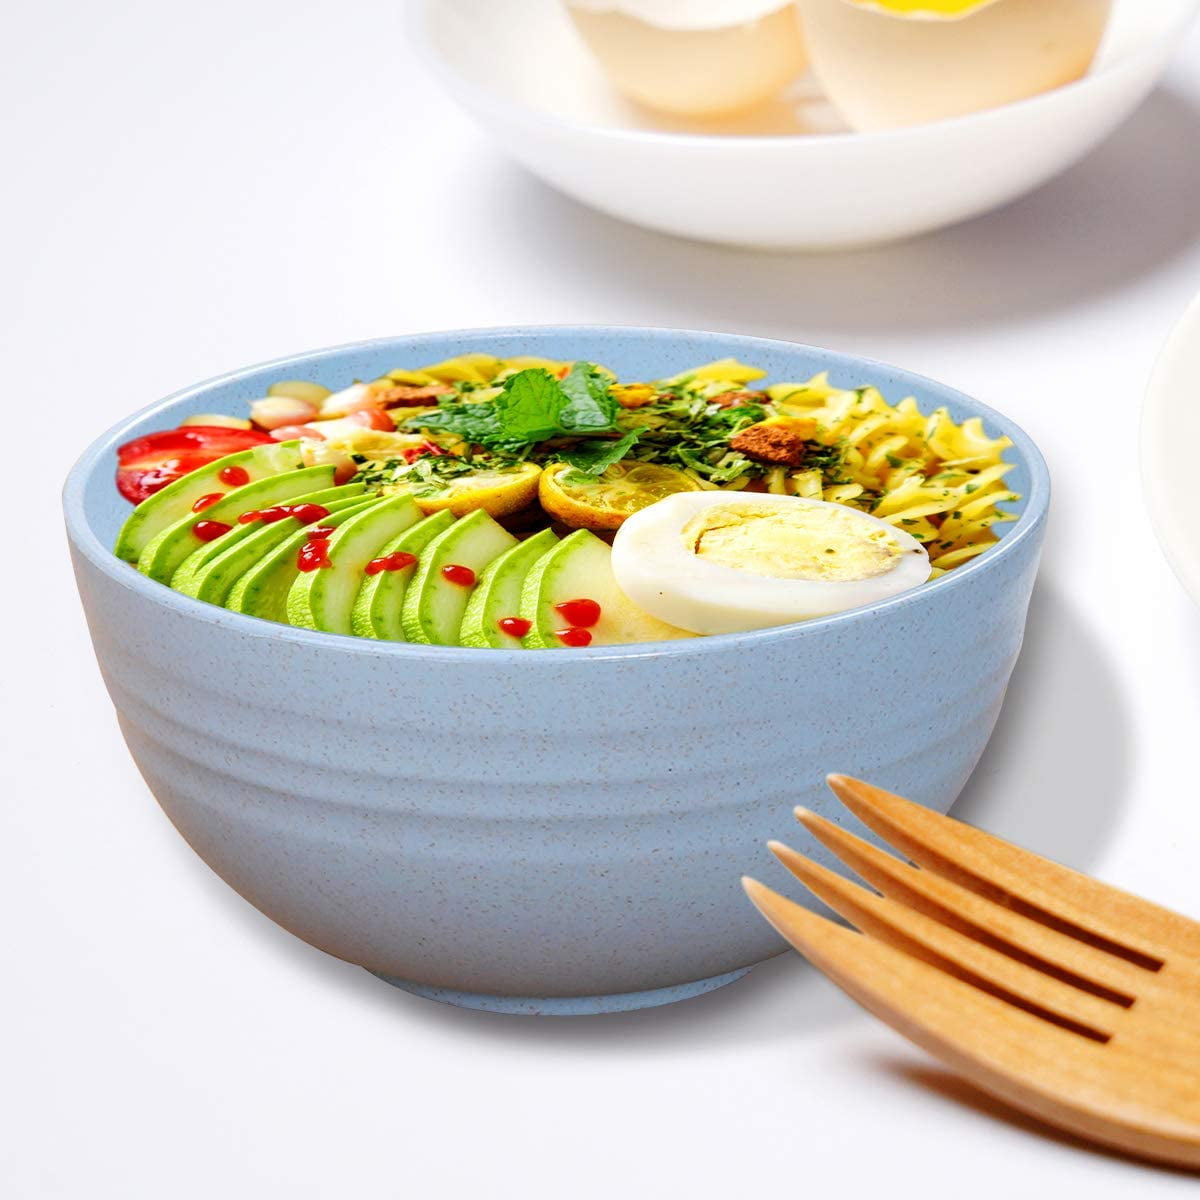 Eternal Night Unbreakable Cereal Bowls Microwave And Dishwasher Safe Wheat  Straw Fiber Lightweight Bowl 6 Colors Soup Bowls Microwavable Kitchen Bowls  For Serving Salad, Rice, Pasta, Dishes